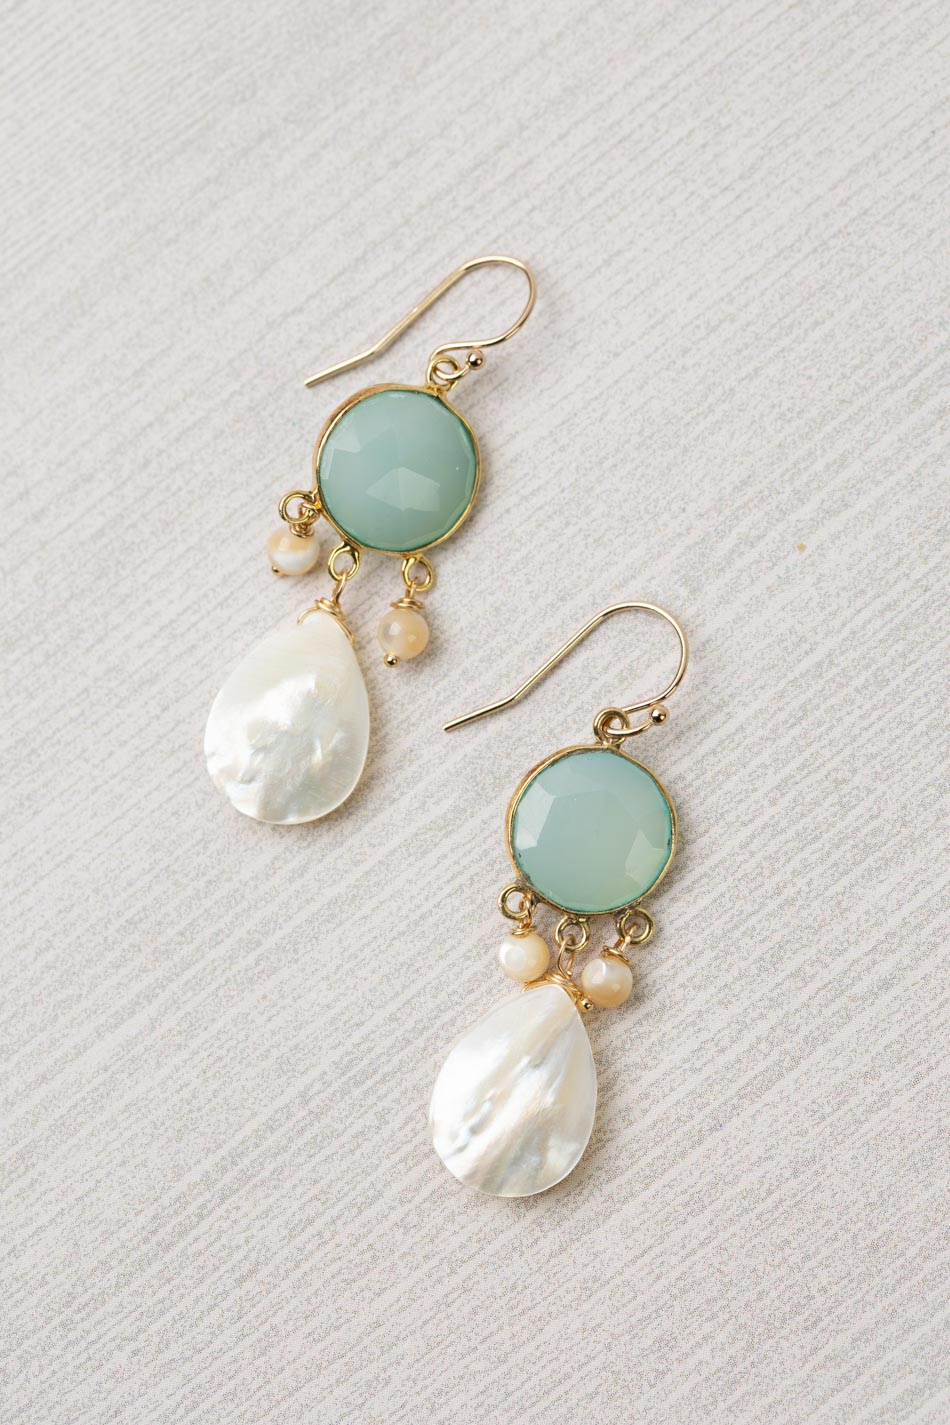 Limited Edition Faceted Chalcedony Bezel With Smooth Mother Of Pearl Teardrop Statement Earrings